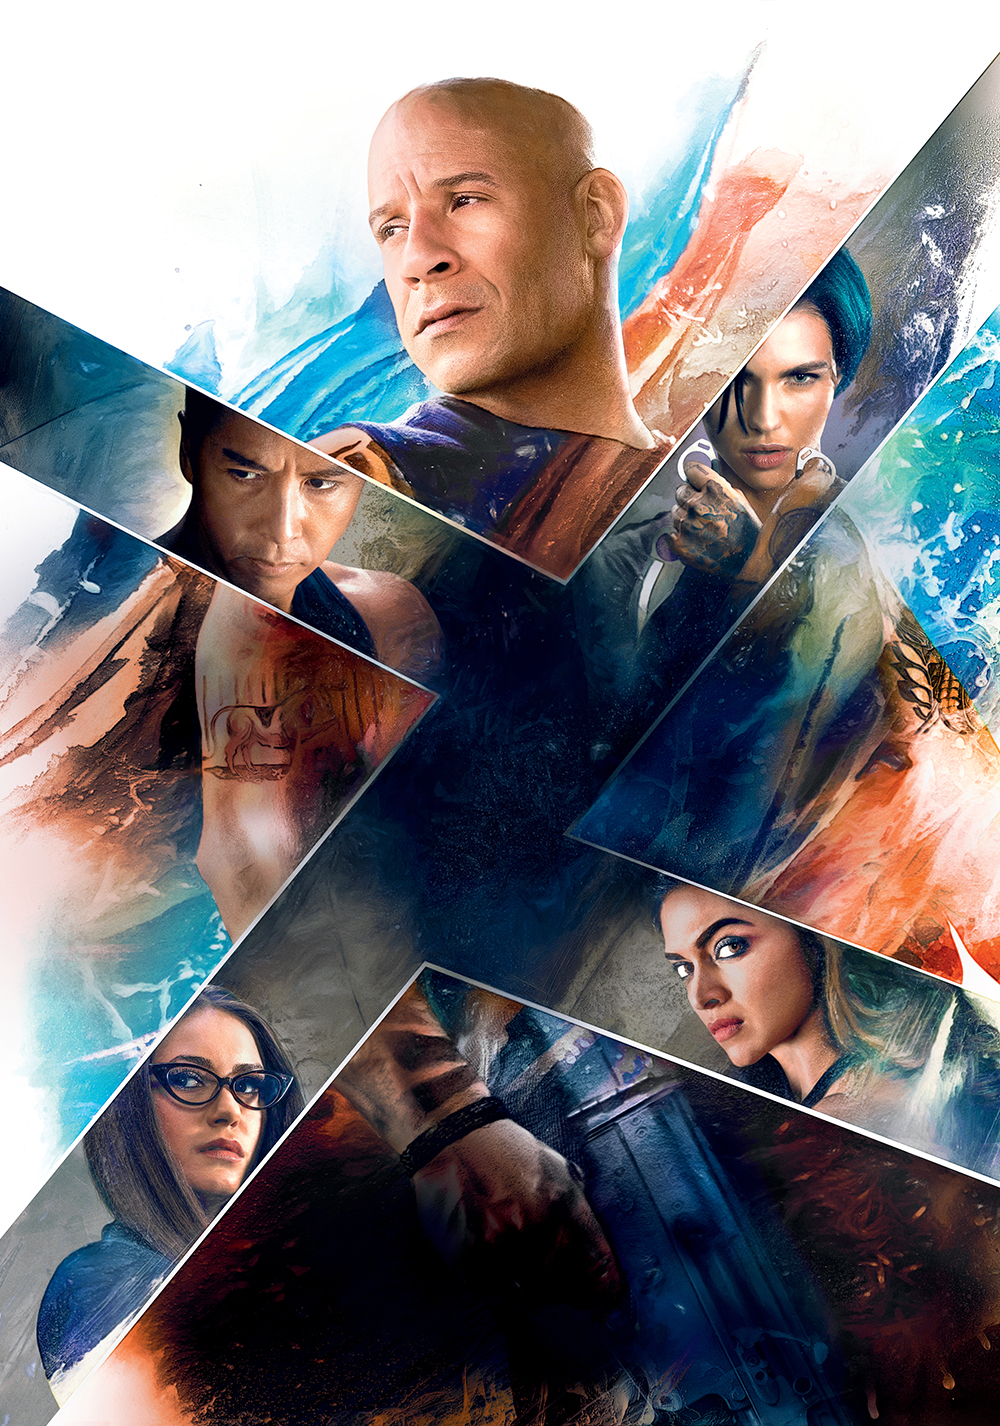 Return of xander cage full movie free download